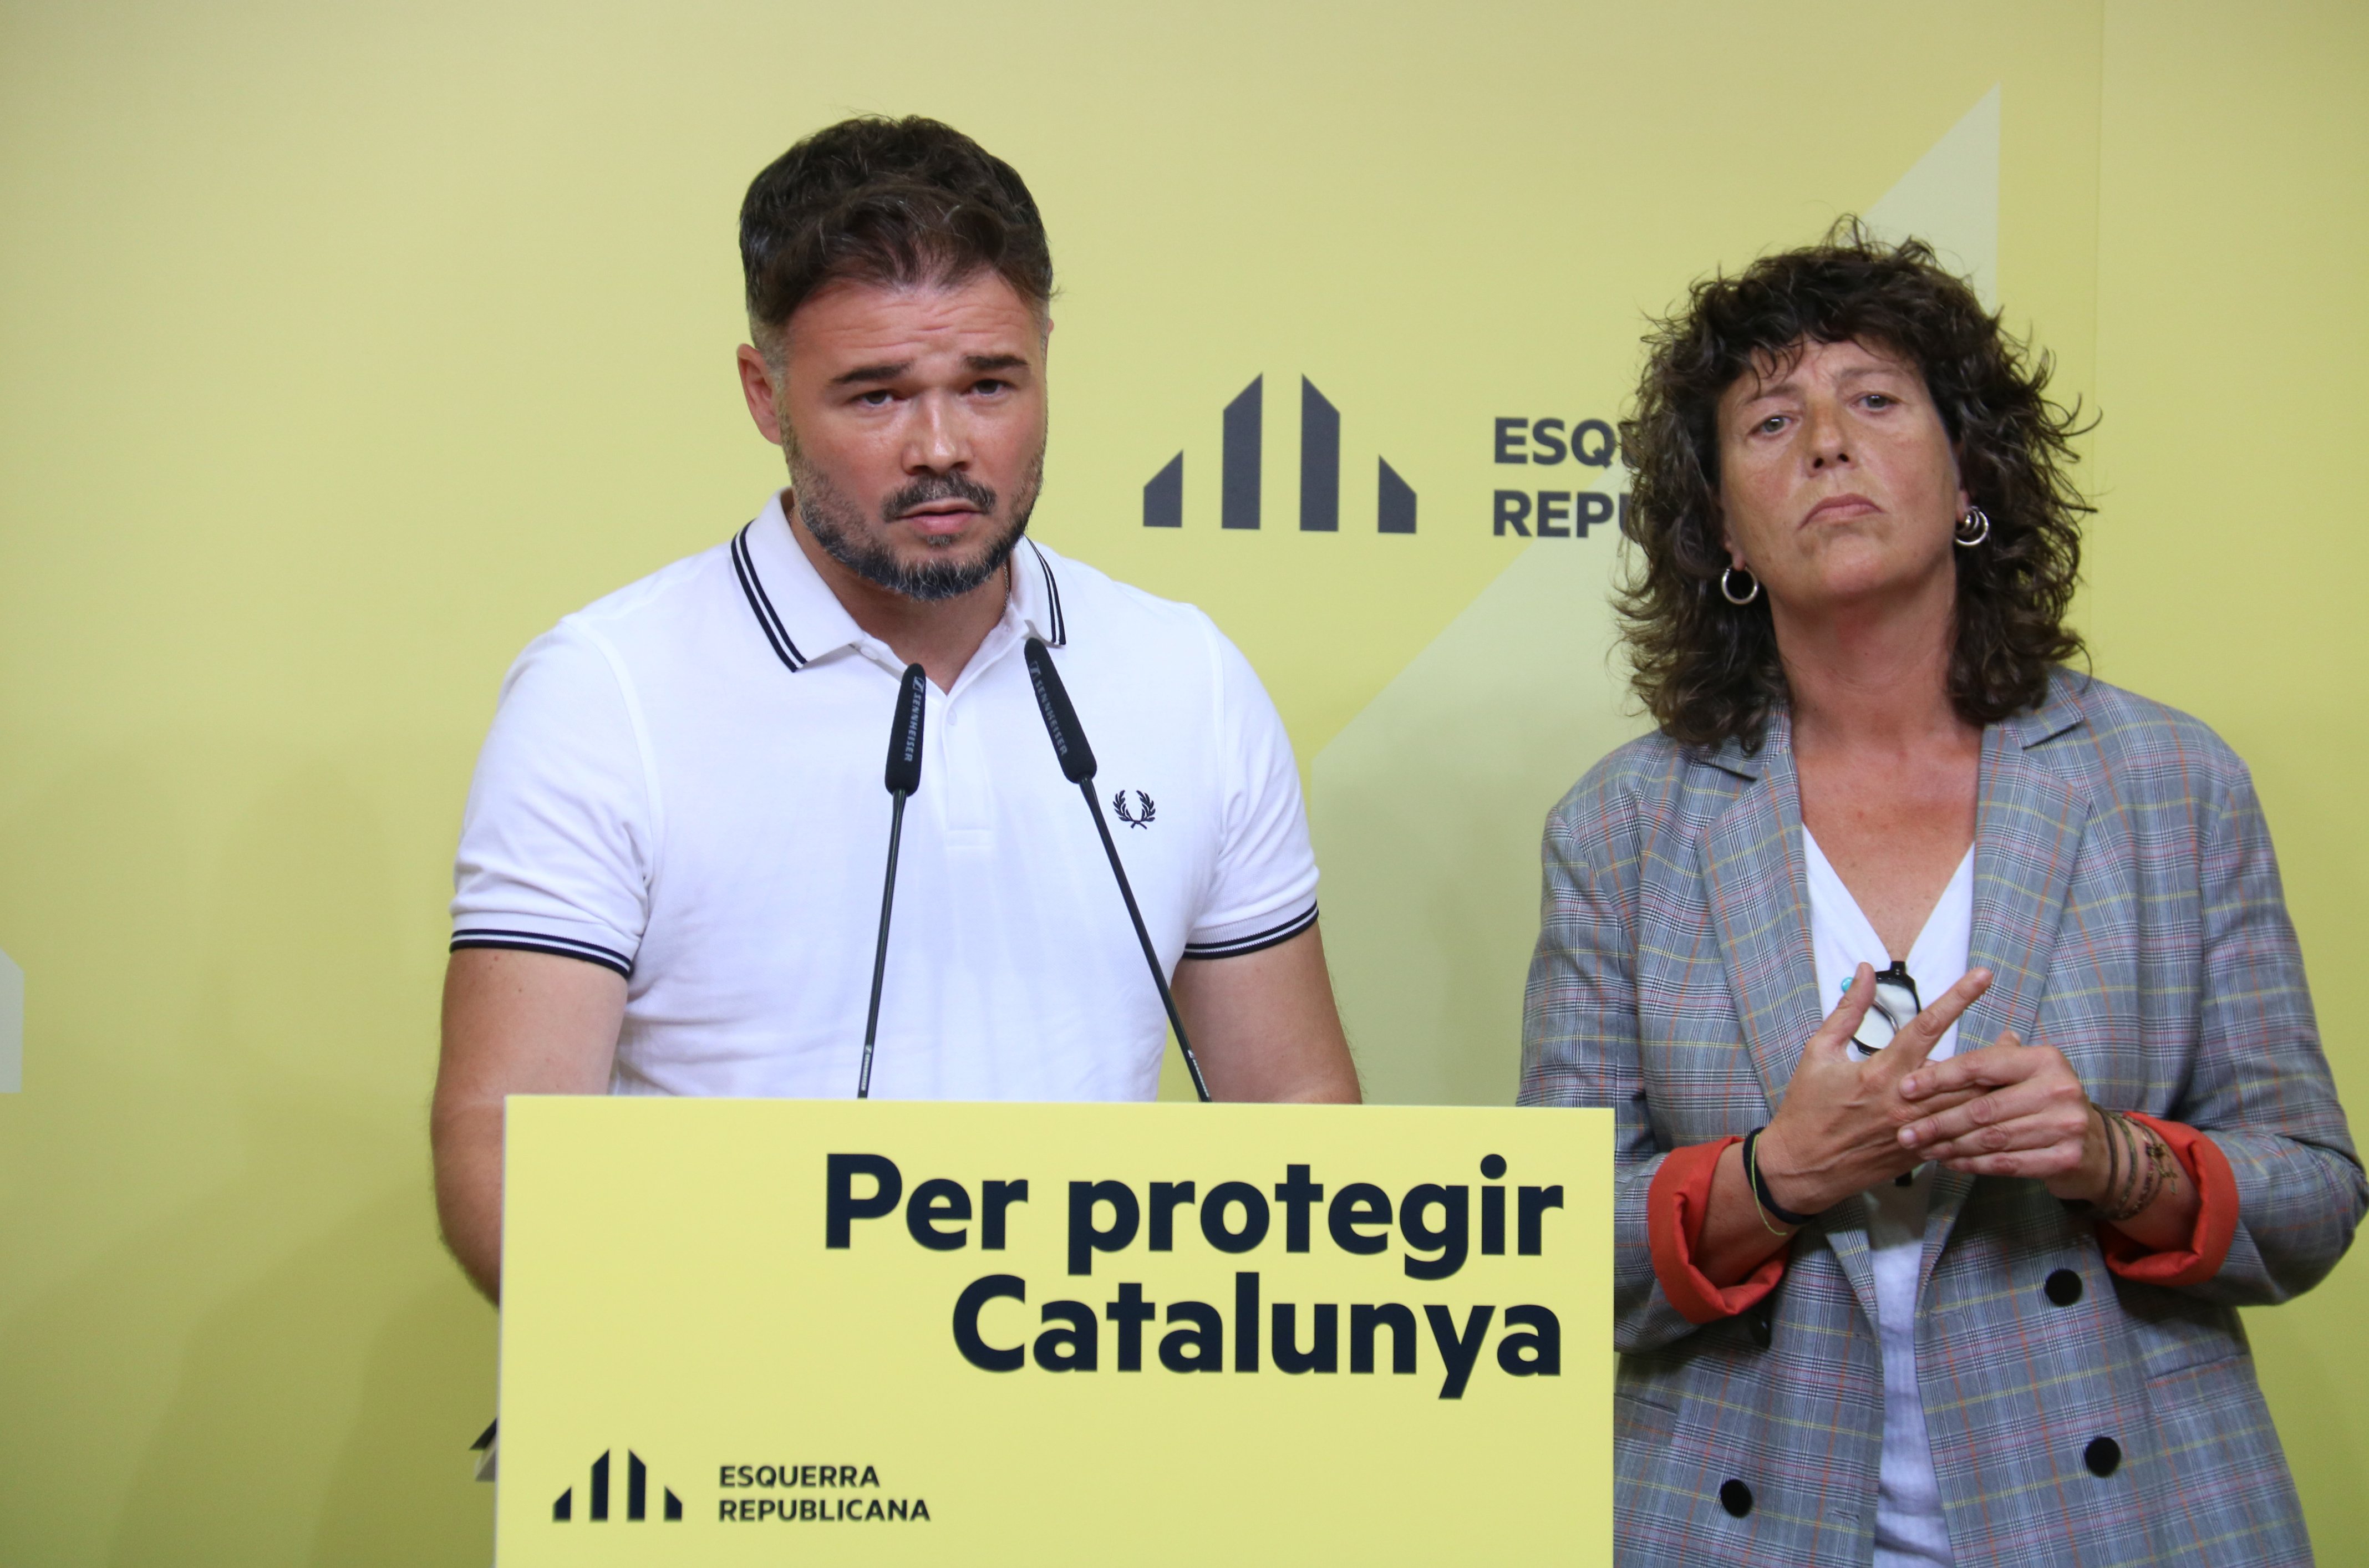 A PSOE-PP grand coalition could result from the Spanish election, warns ERC's Rufián